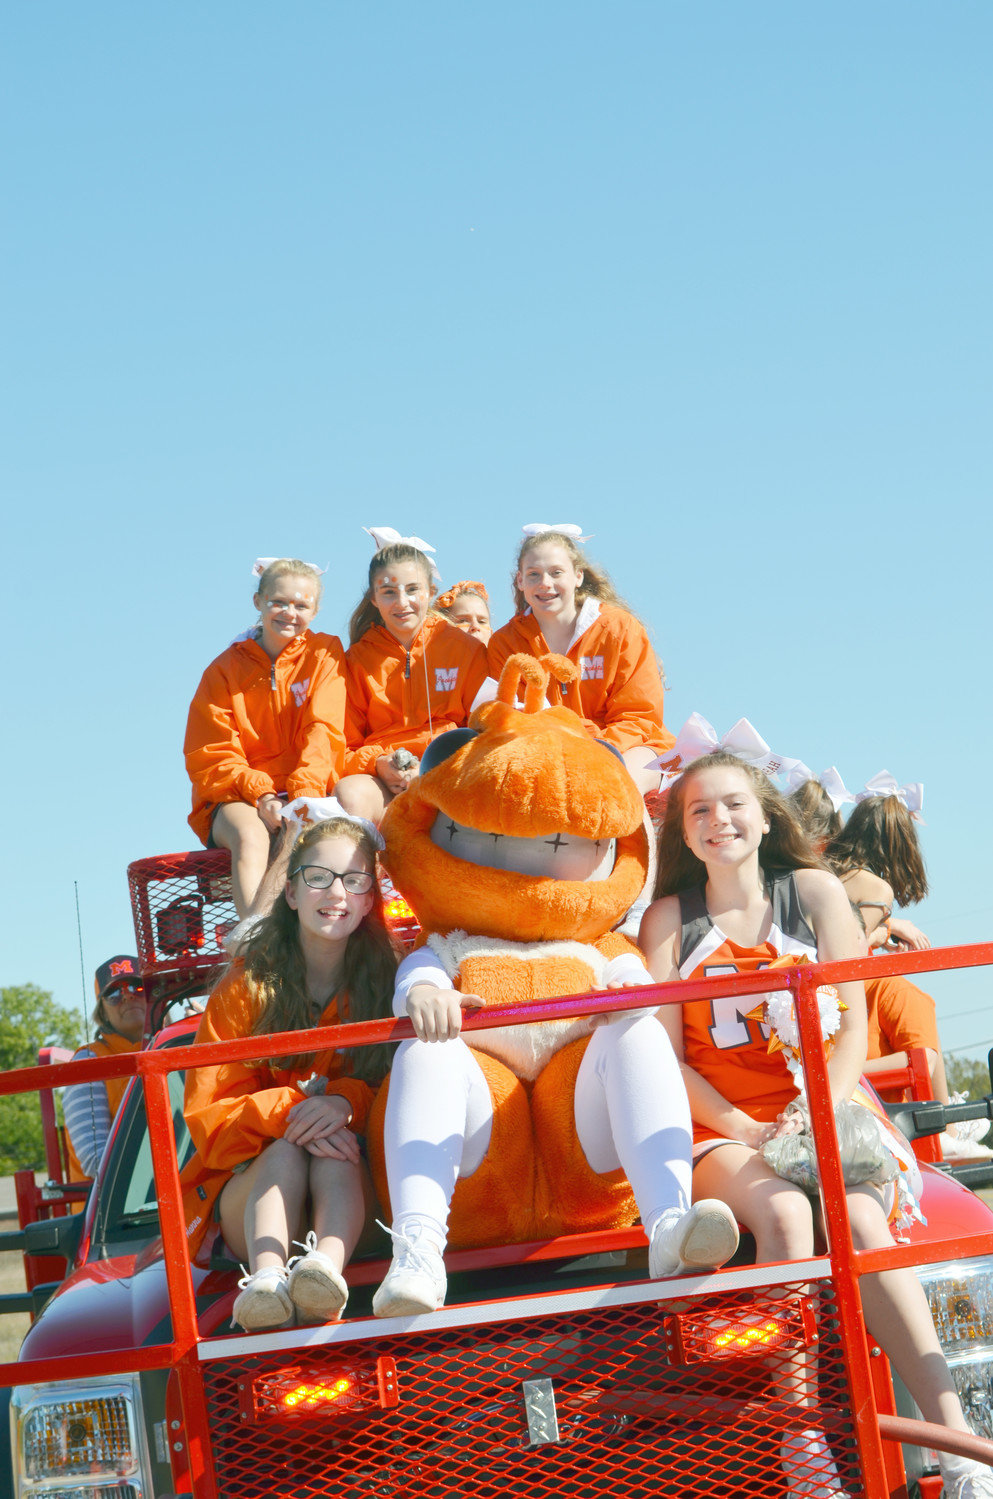 he Yellowjacket mascot is surrounded by a host of young supporters of Mineola High School during the Homecoming Parade on Friday along Broad Street.